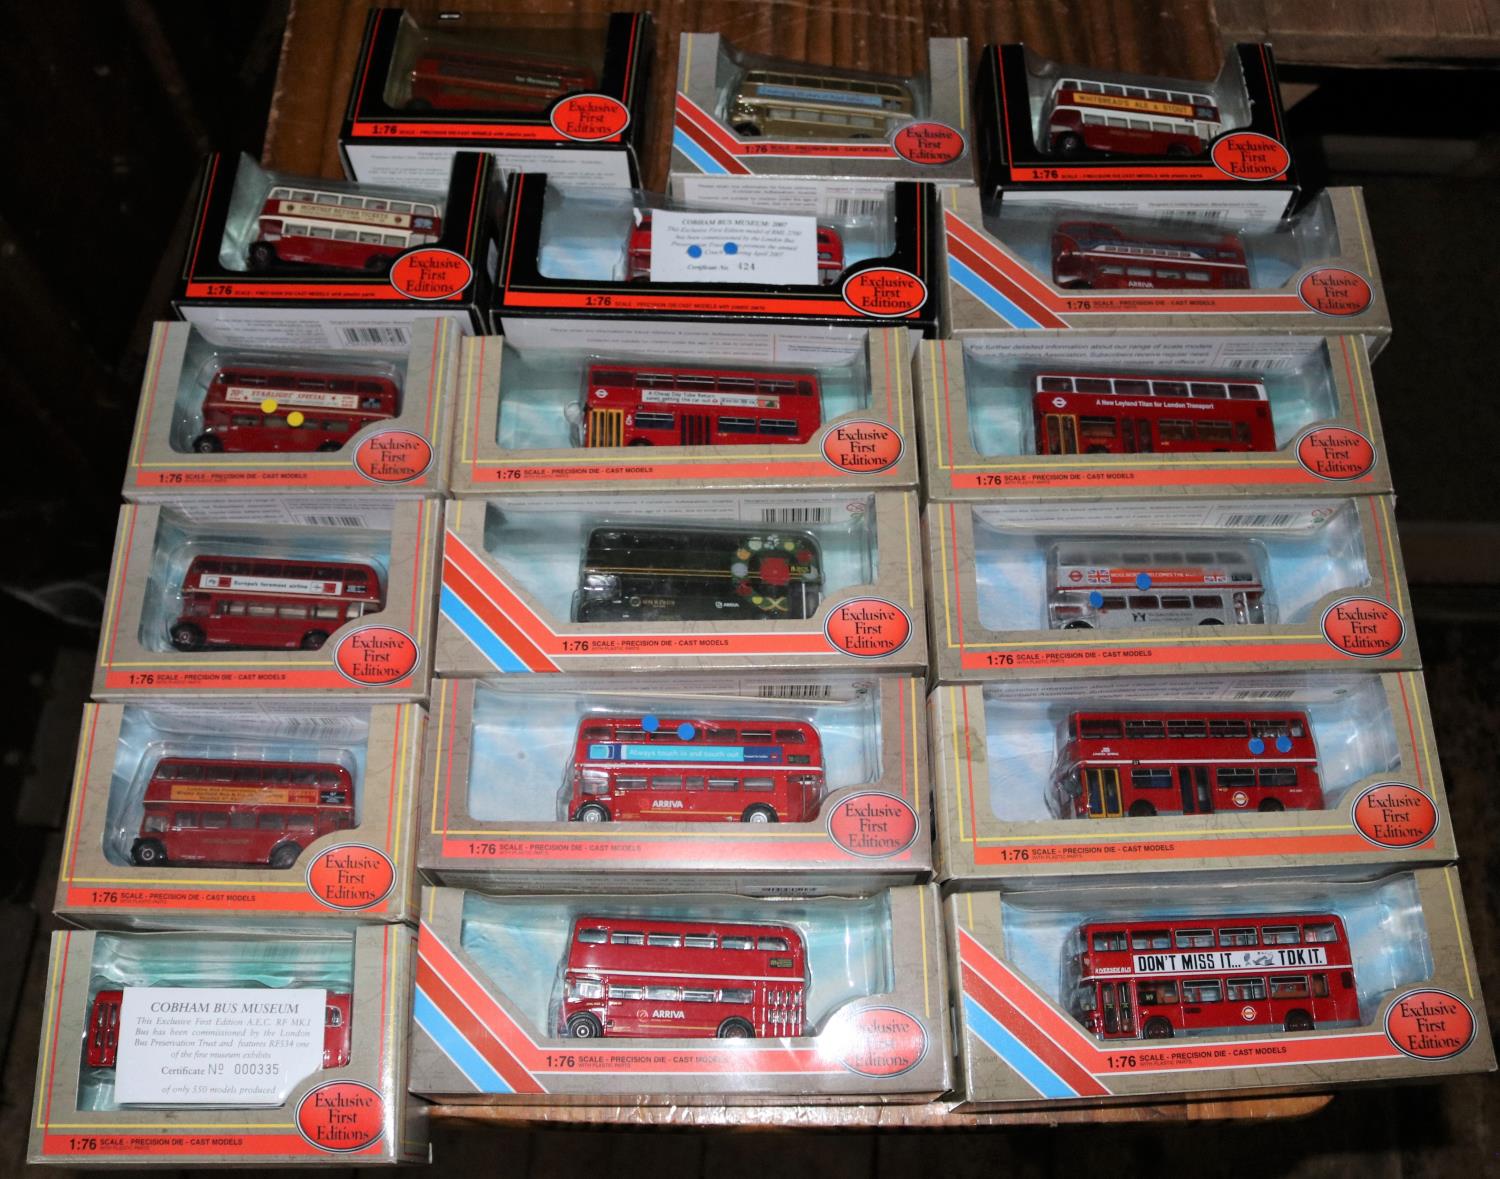 18 EFE Buses and Coaches all London Transport and district. 7x AEC Routemaster- 2x RMC, Arriva